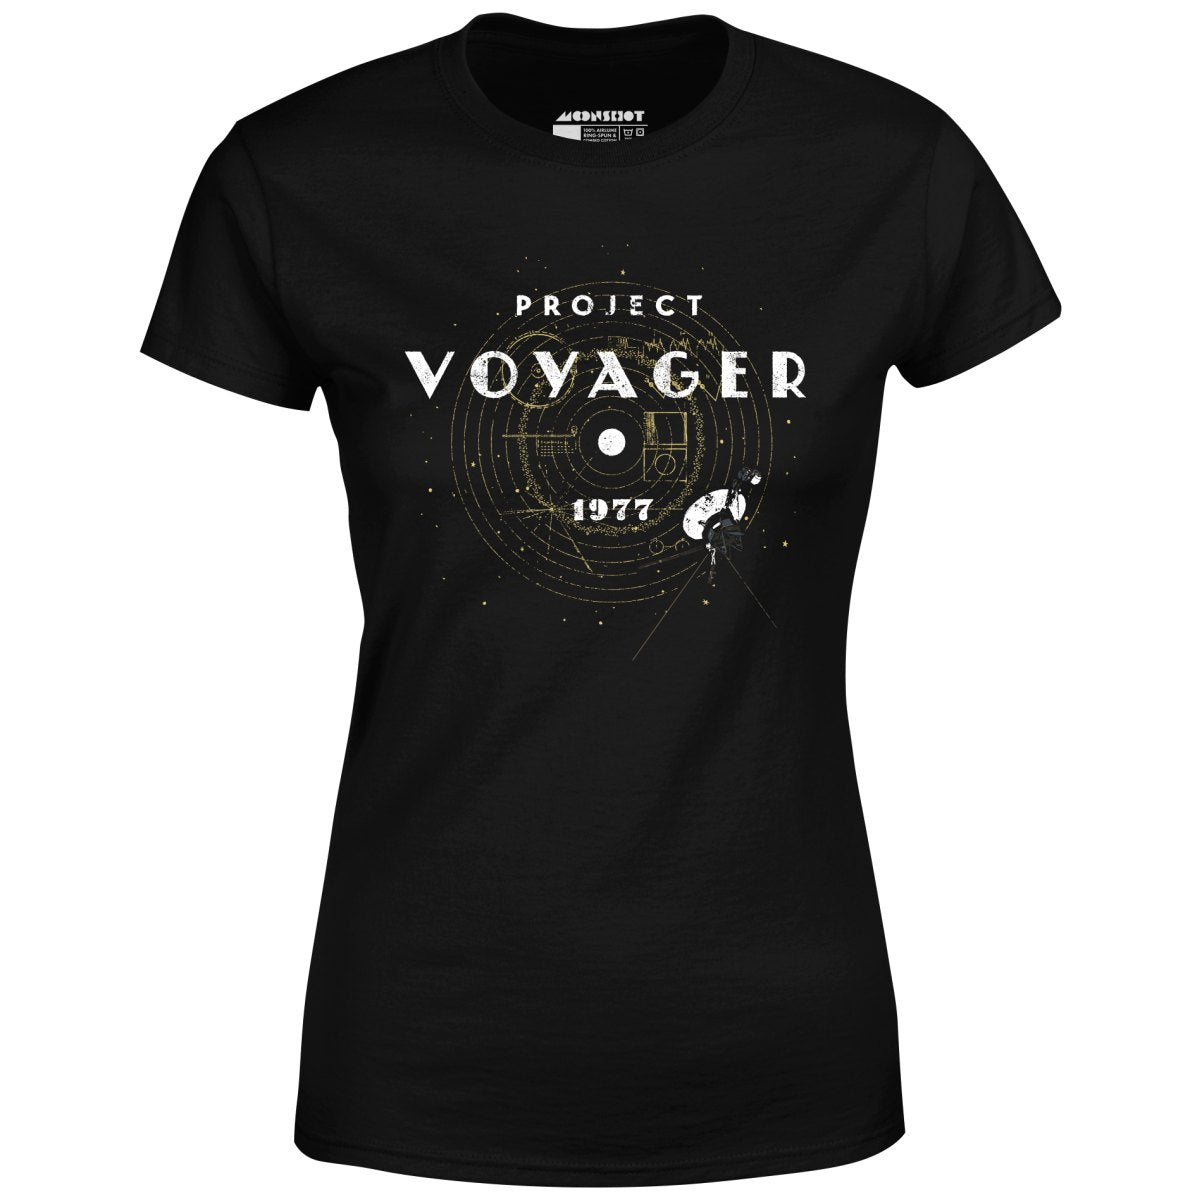 Project Voyager Mission - Golden Record - Women's T-Shirt